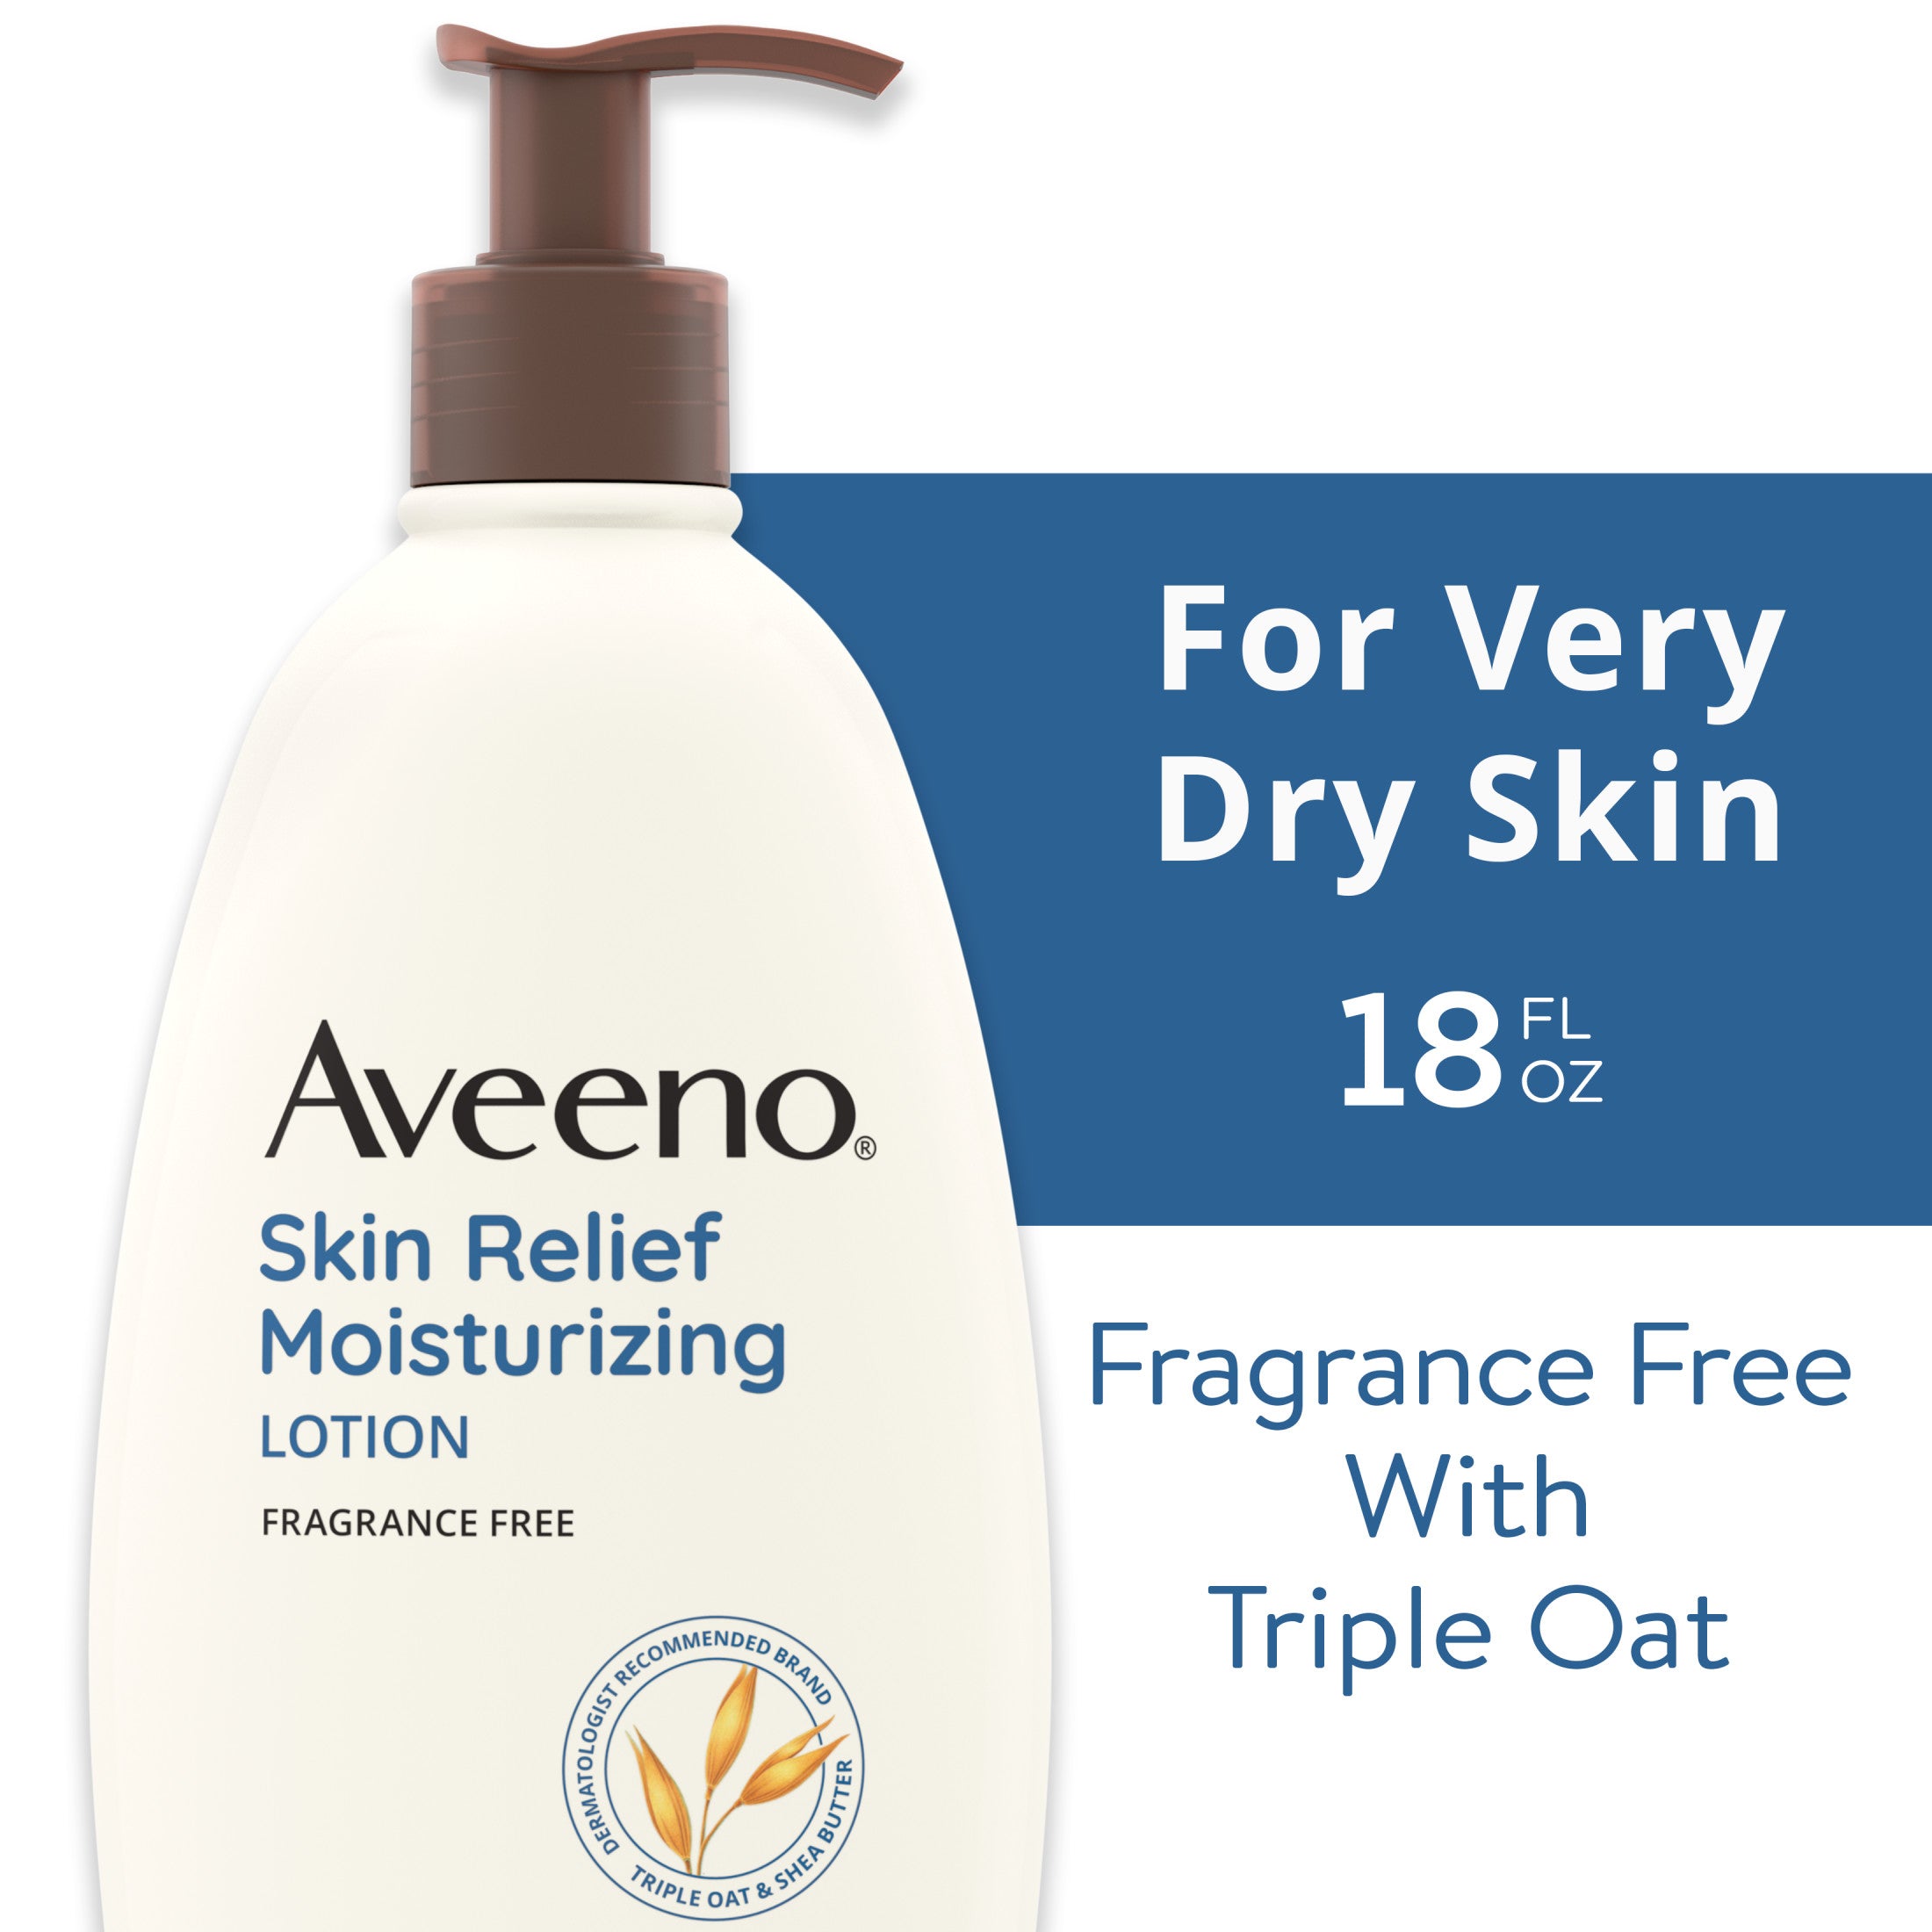 Aveeno Skin Relief Moisturizing Body and Hand Lotion for Dry Skin, Fragrance Free, 18 oz | MTTS340